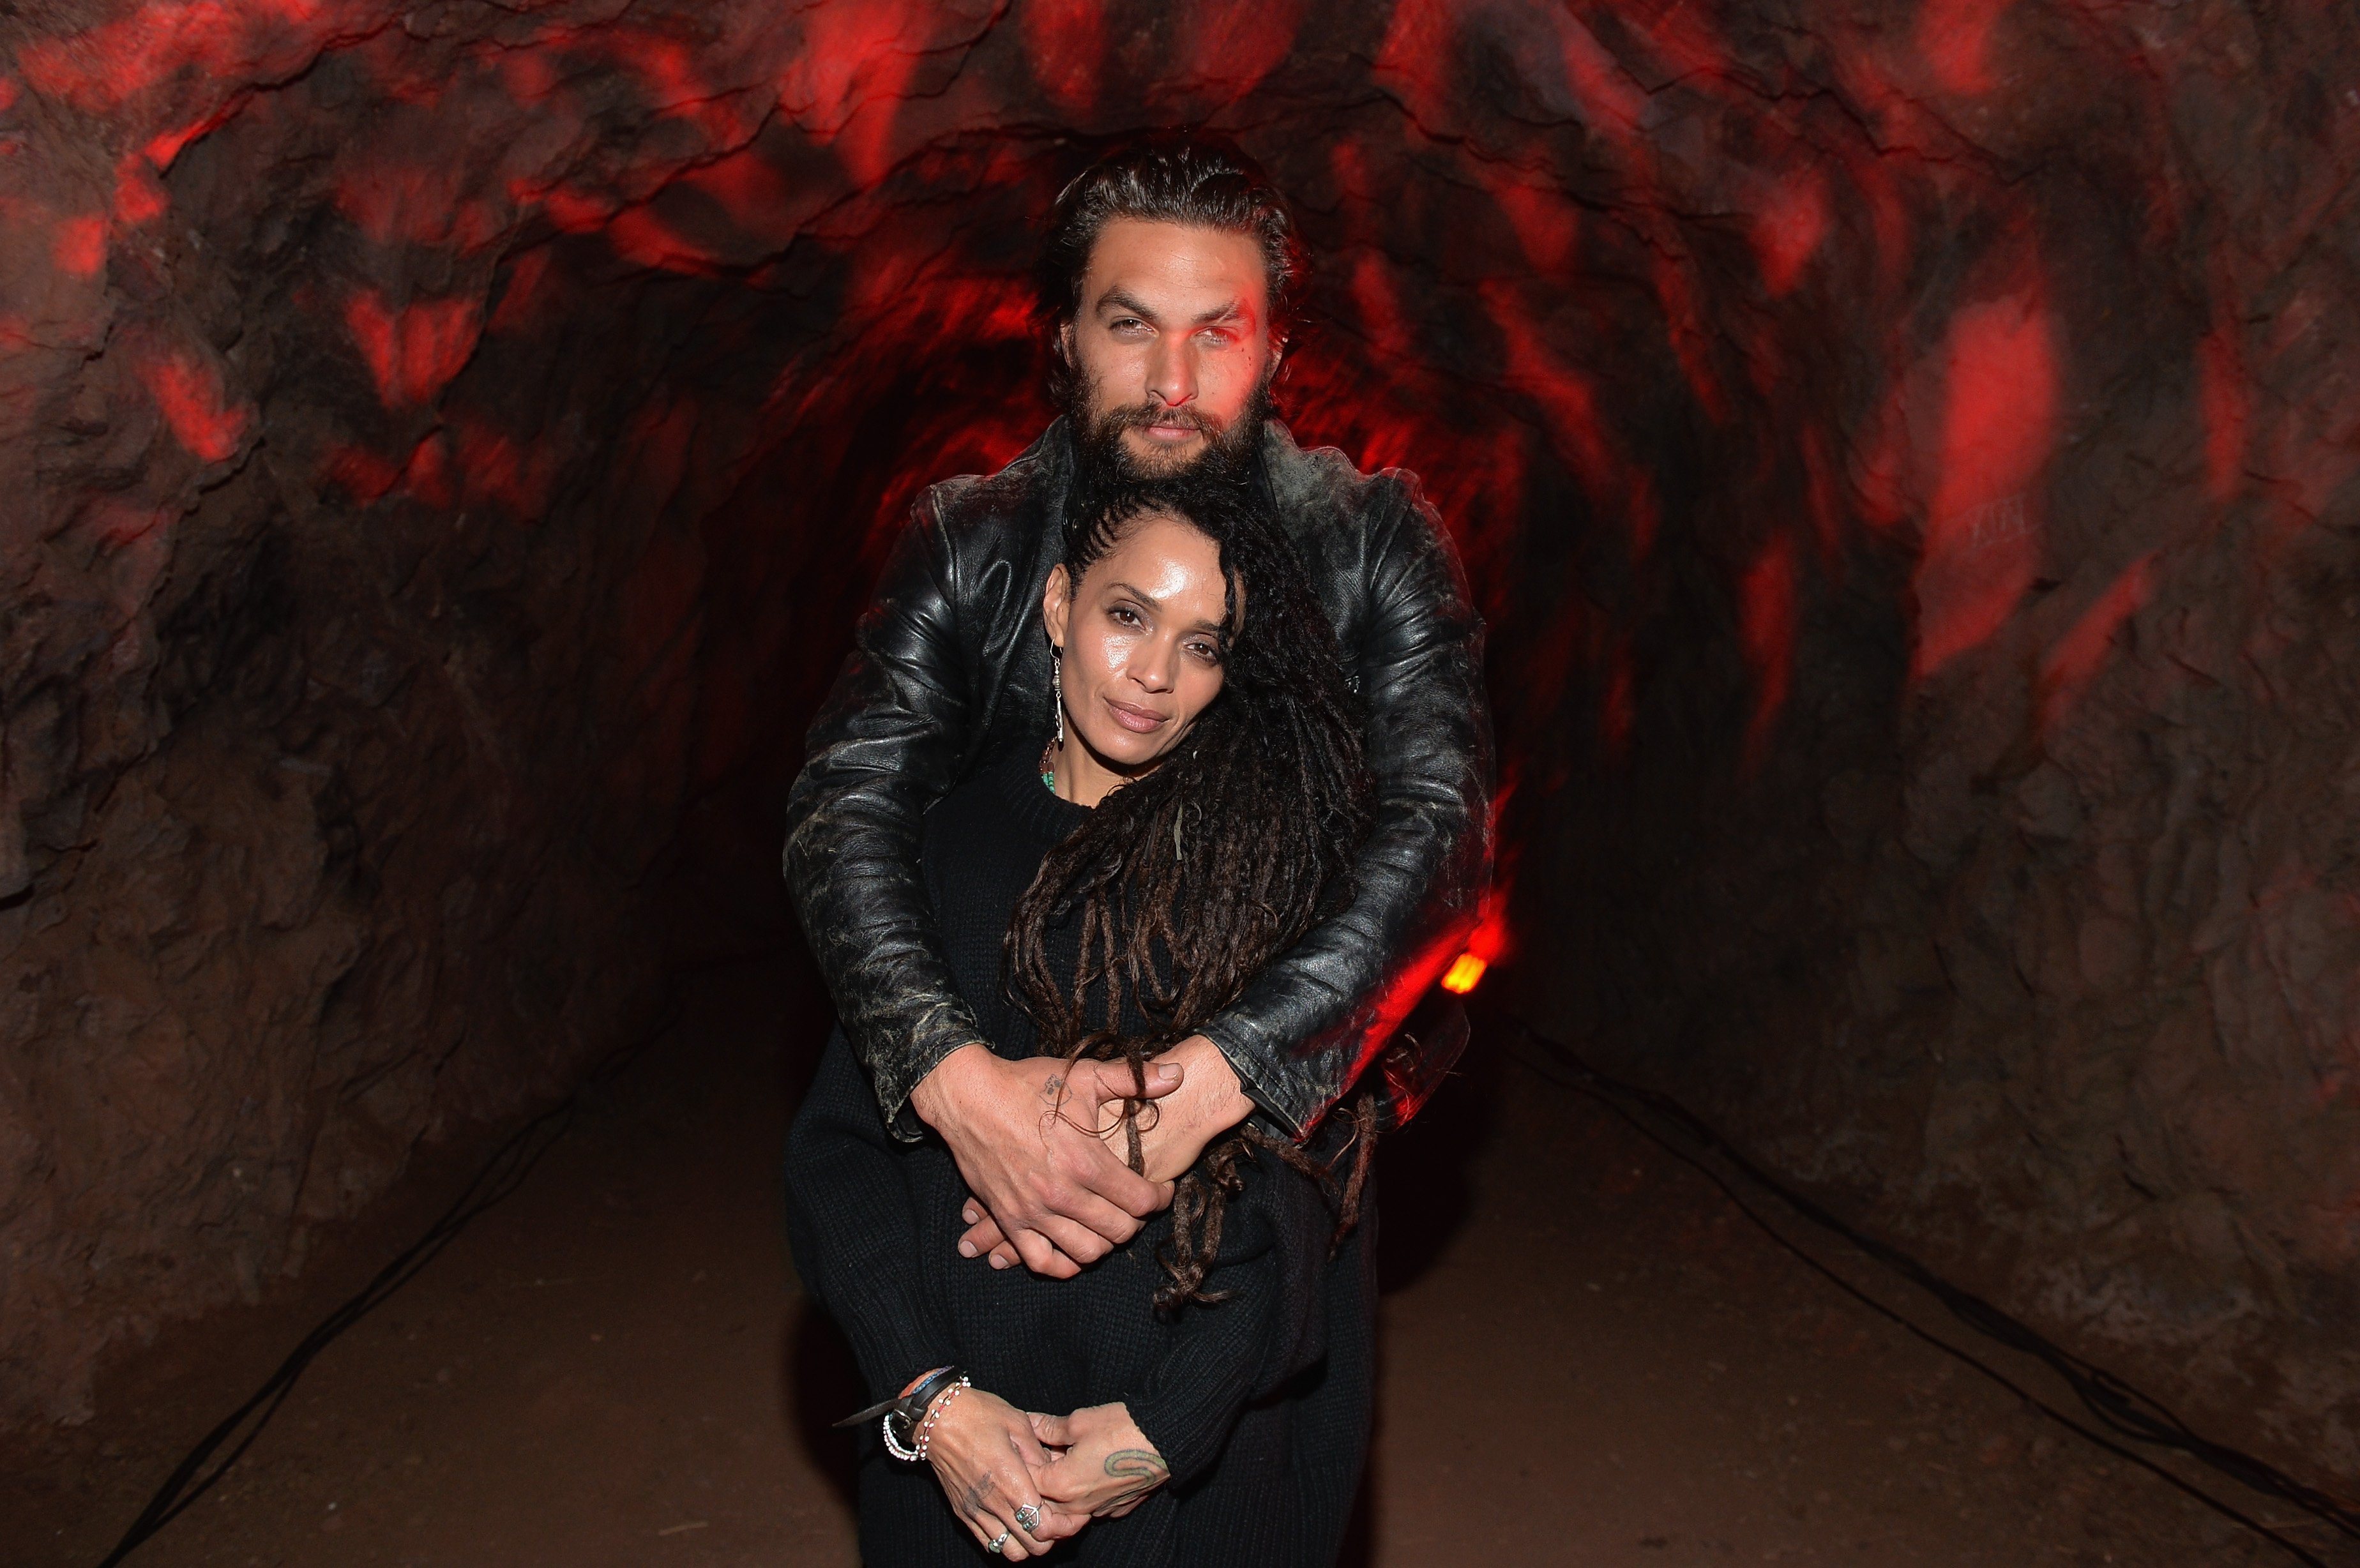 Lisa Bonet and Jason Momoa attend a screening of "The Red Road" at The Bronson Caves at Griffith Park on February 24, 2014 in Los Angeles, California. / Source: Getty Images